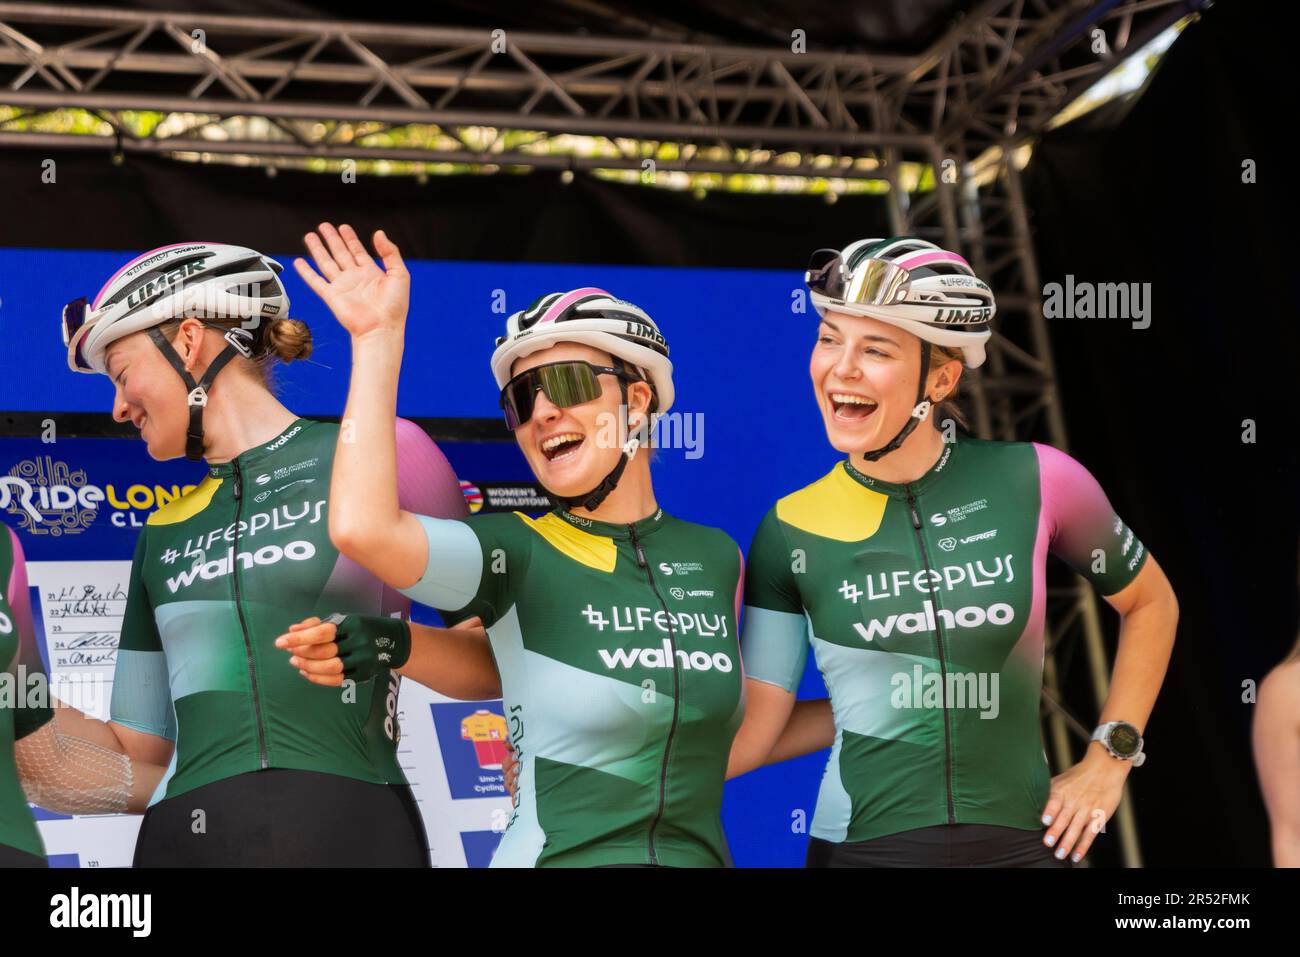 April Tacey & Lifeplus Wahoo team riders before the RideLondon Classique Stage 3 UCI Women's World Tour cycle race around roads in central London, UK. Stock Photo